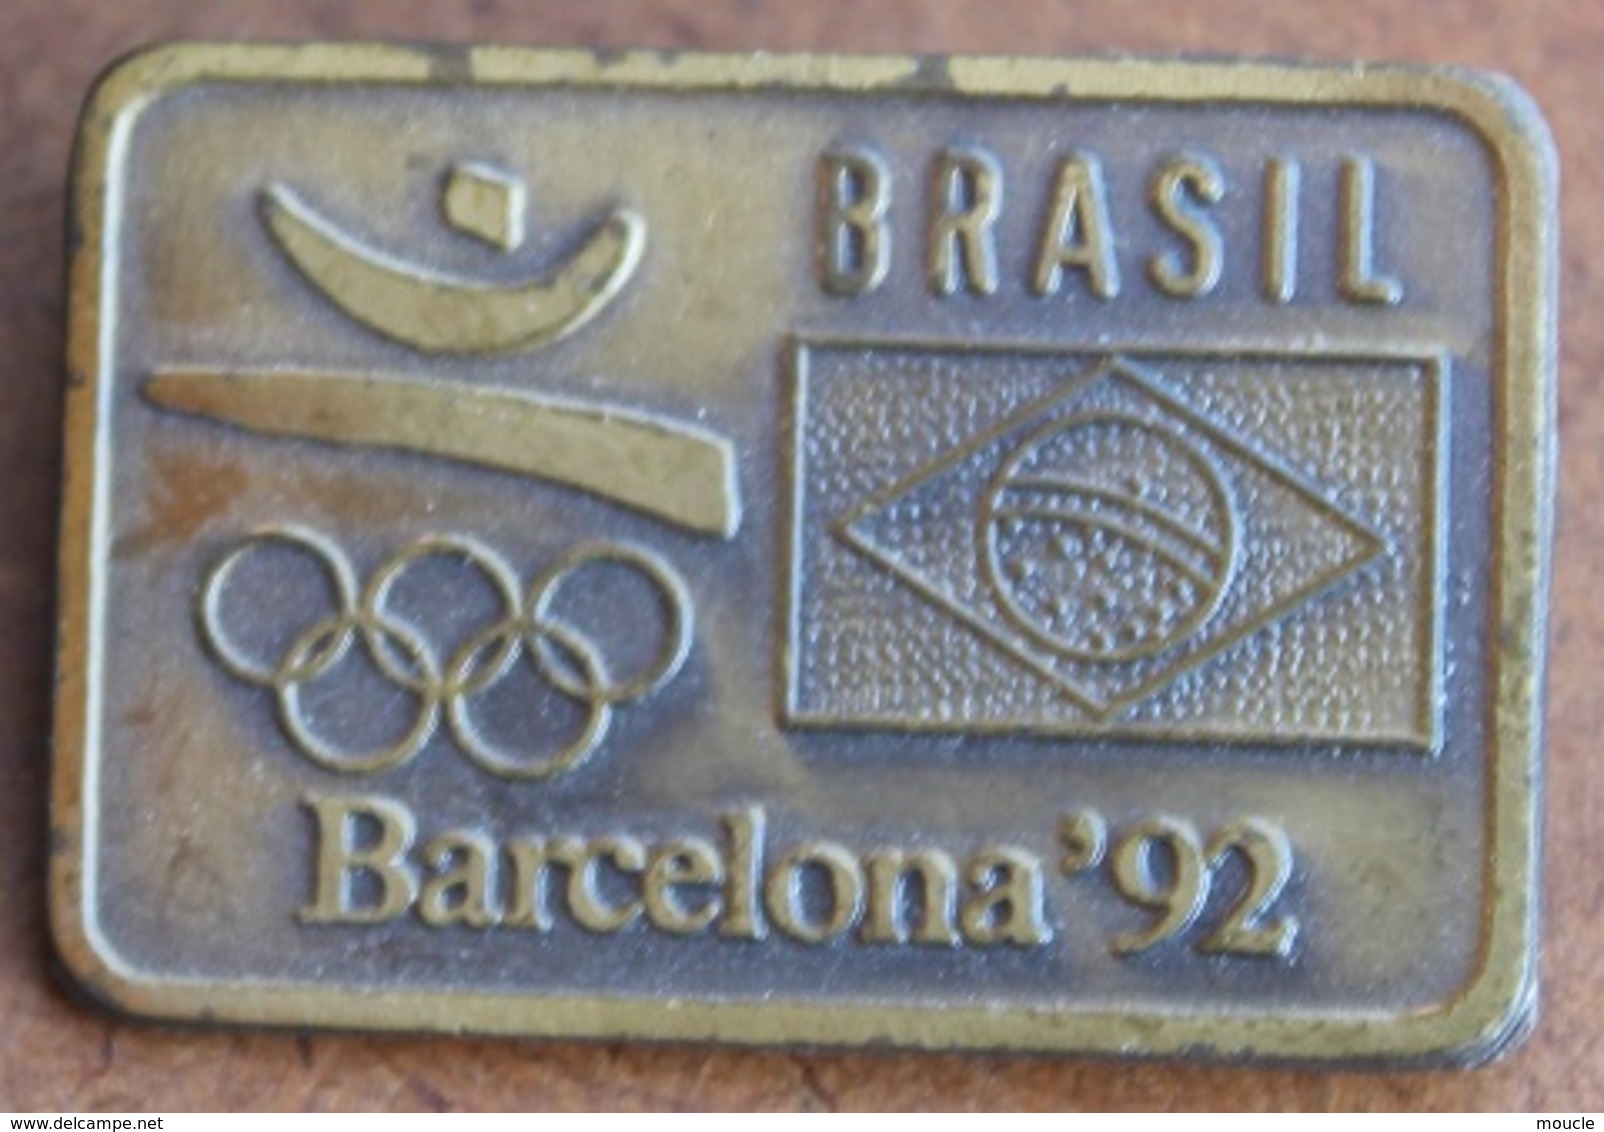 ATTENTION C'EST UNE BROCHE - SPINDEL - BROOCH -  JEUX OLYMPIQUES BARCELONA 92 - BRASIL OLYMPIC TEAM - BRESIL - Olympic Games